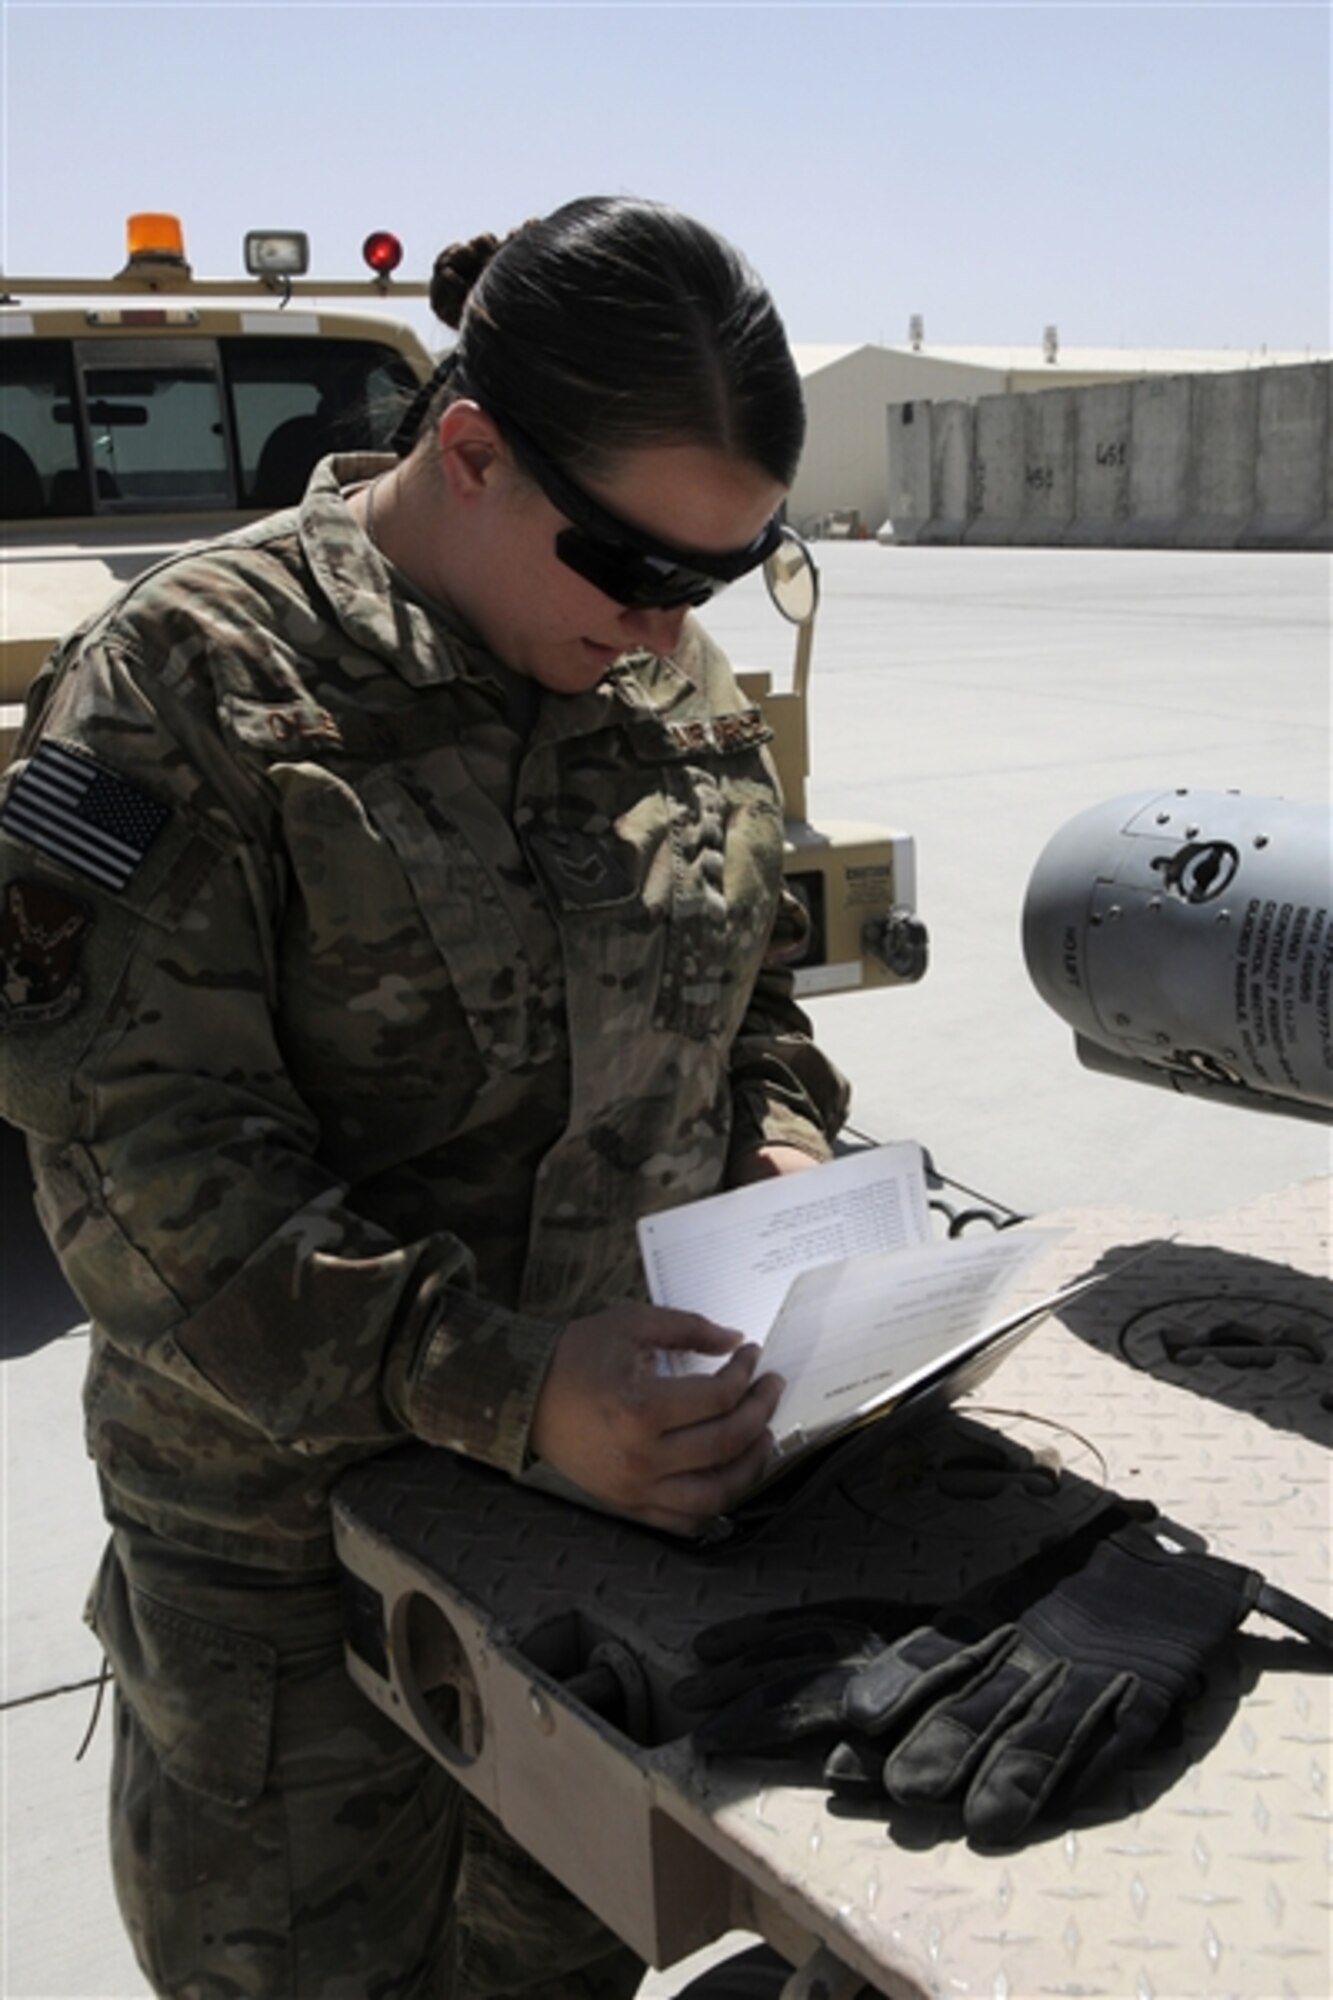 Airman 1st Class Rhiannon O'Leary reviews paperwork during delivery of munitions to the flightline at Kandahar Airfield, Afghanistan, June 14, 2012. U.S. Air Force photo by Tech. Sgt. Stephen Hudson 